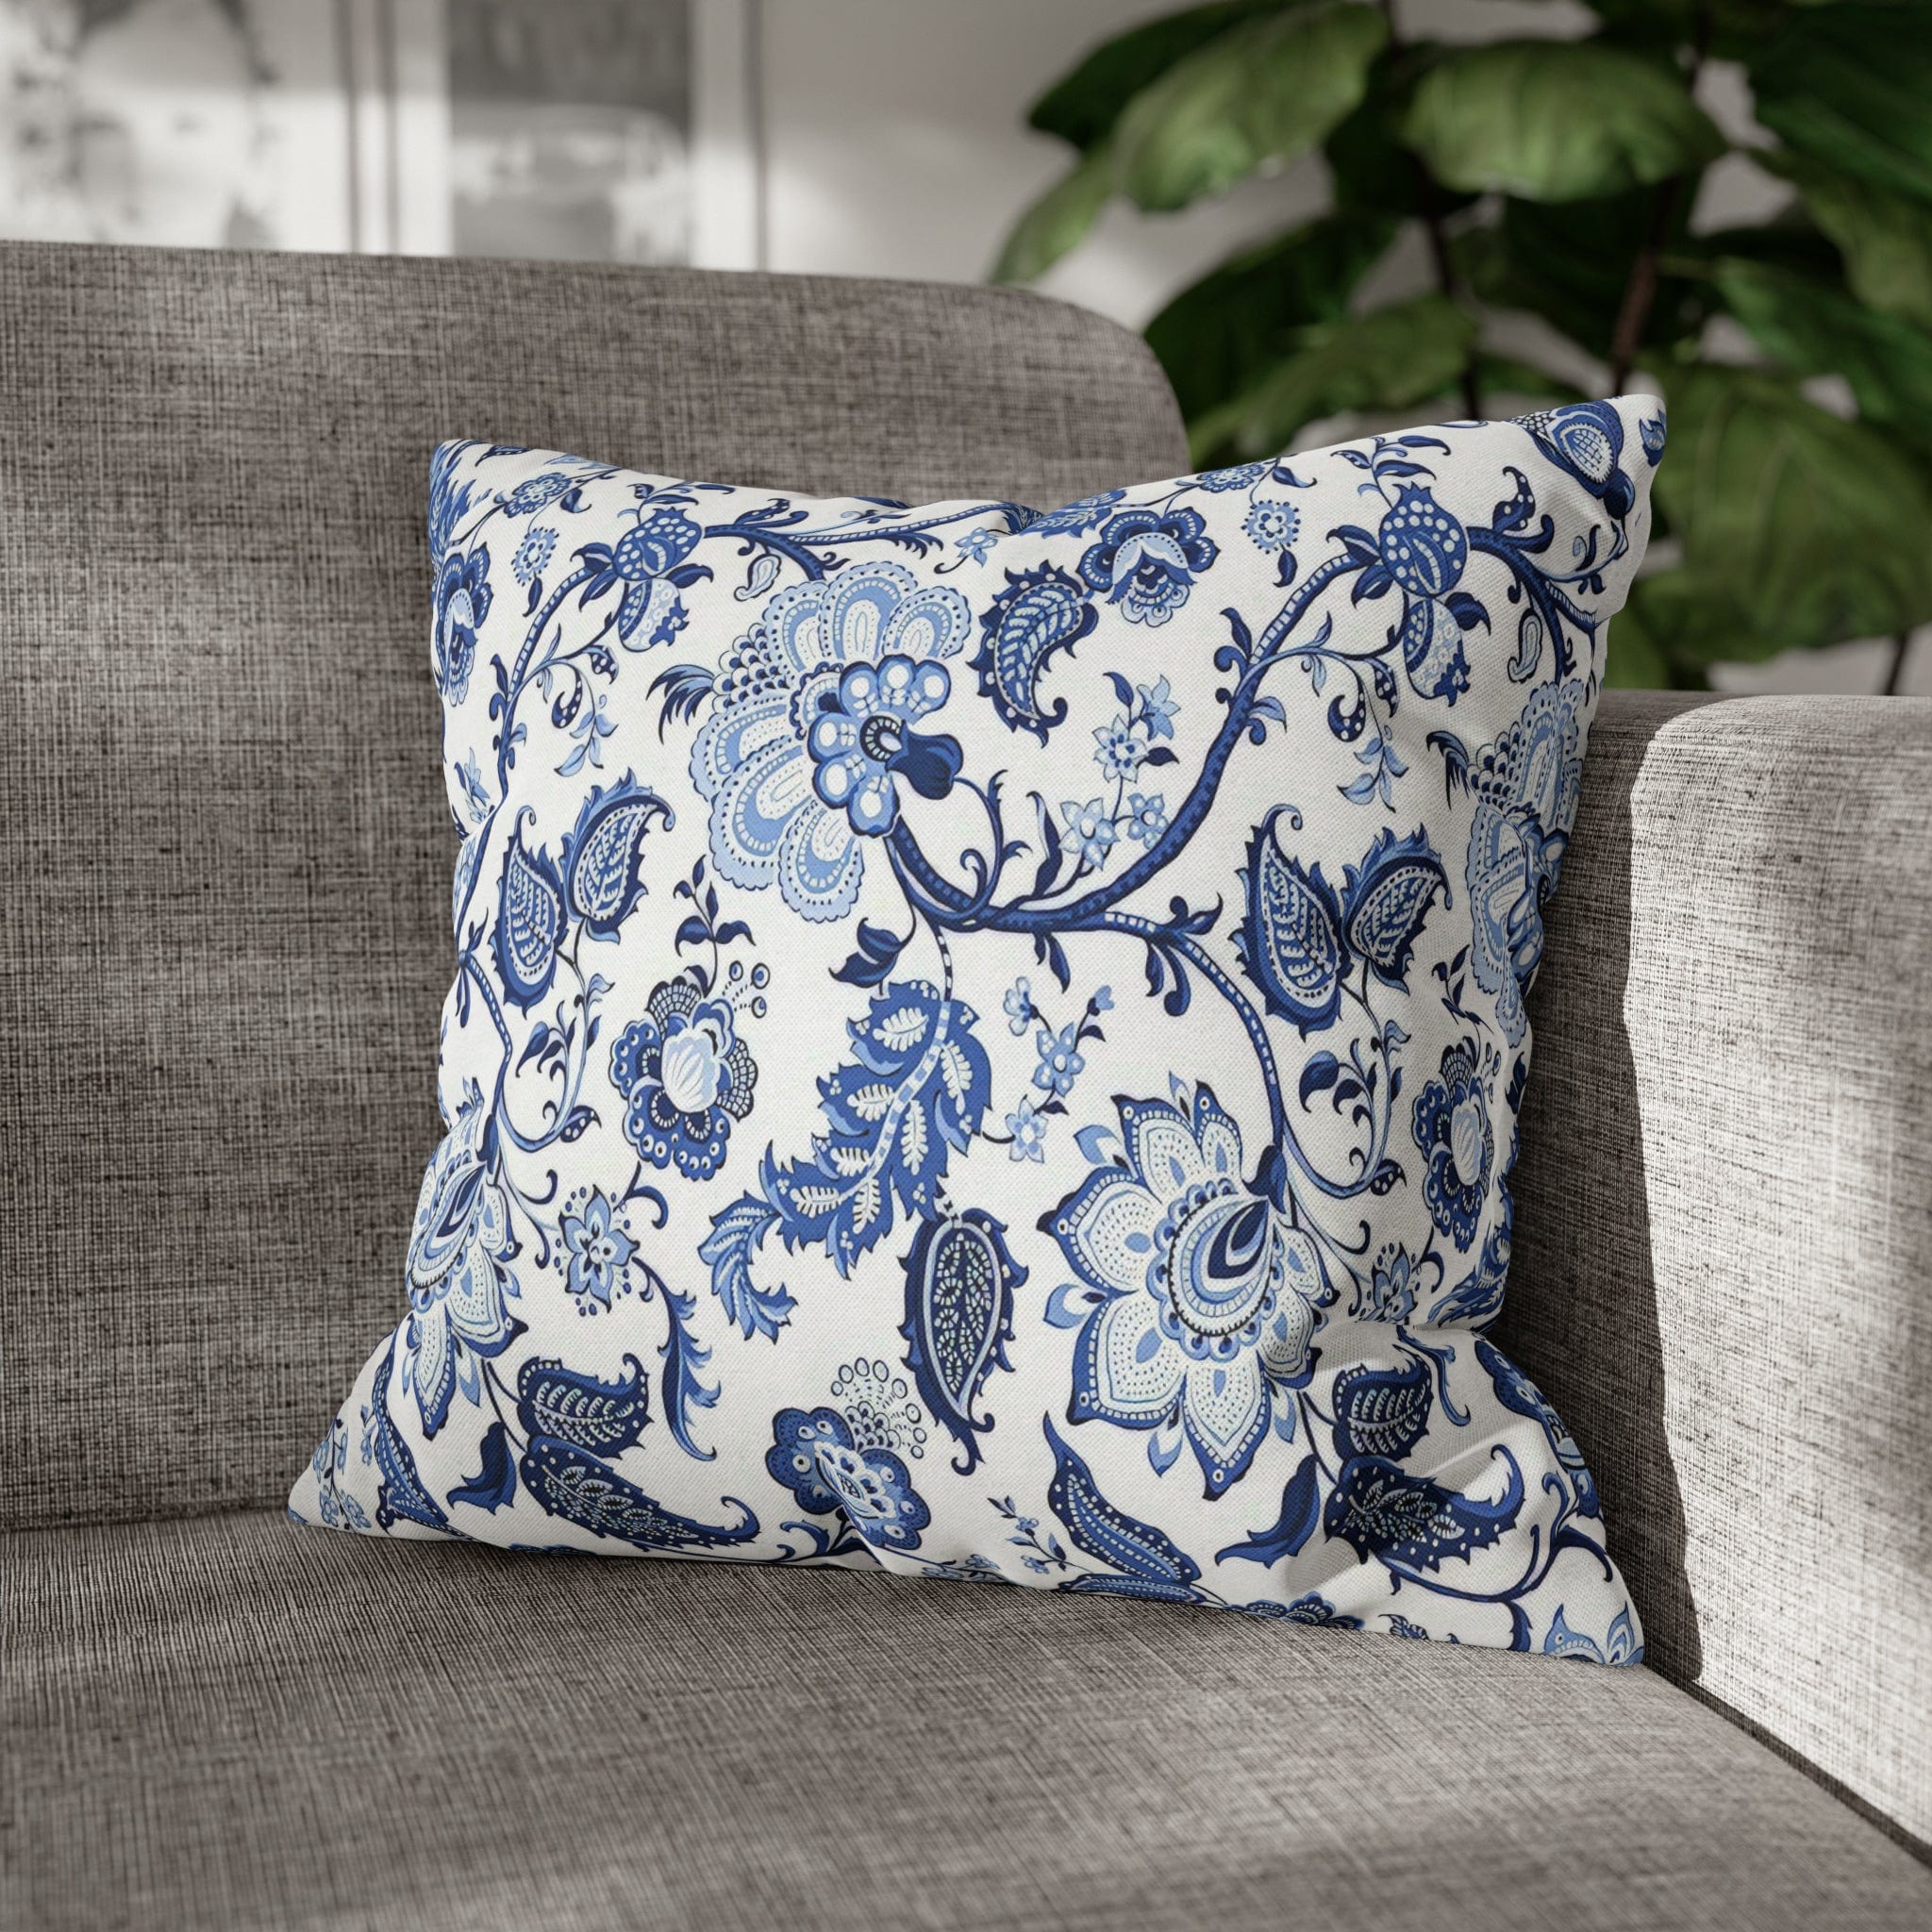 Printify Blue and White Floral Chinoiserie Pillow Cover Home Decor